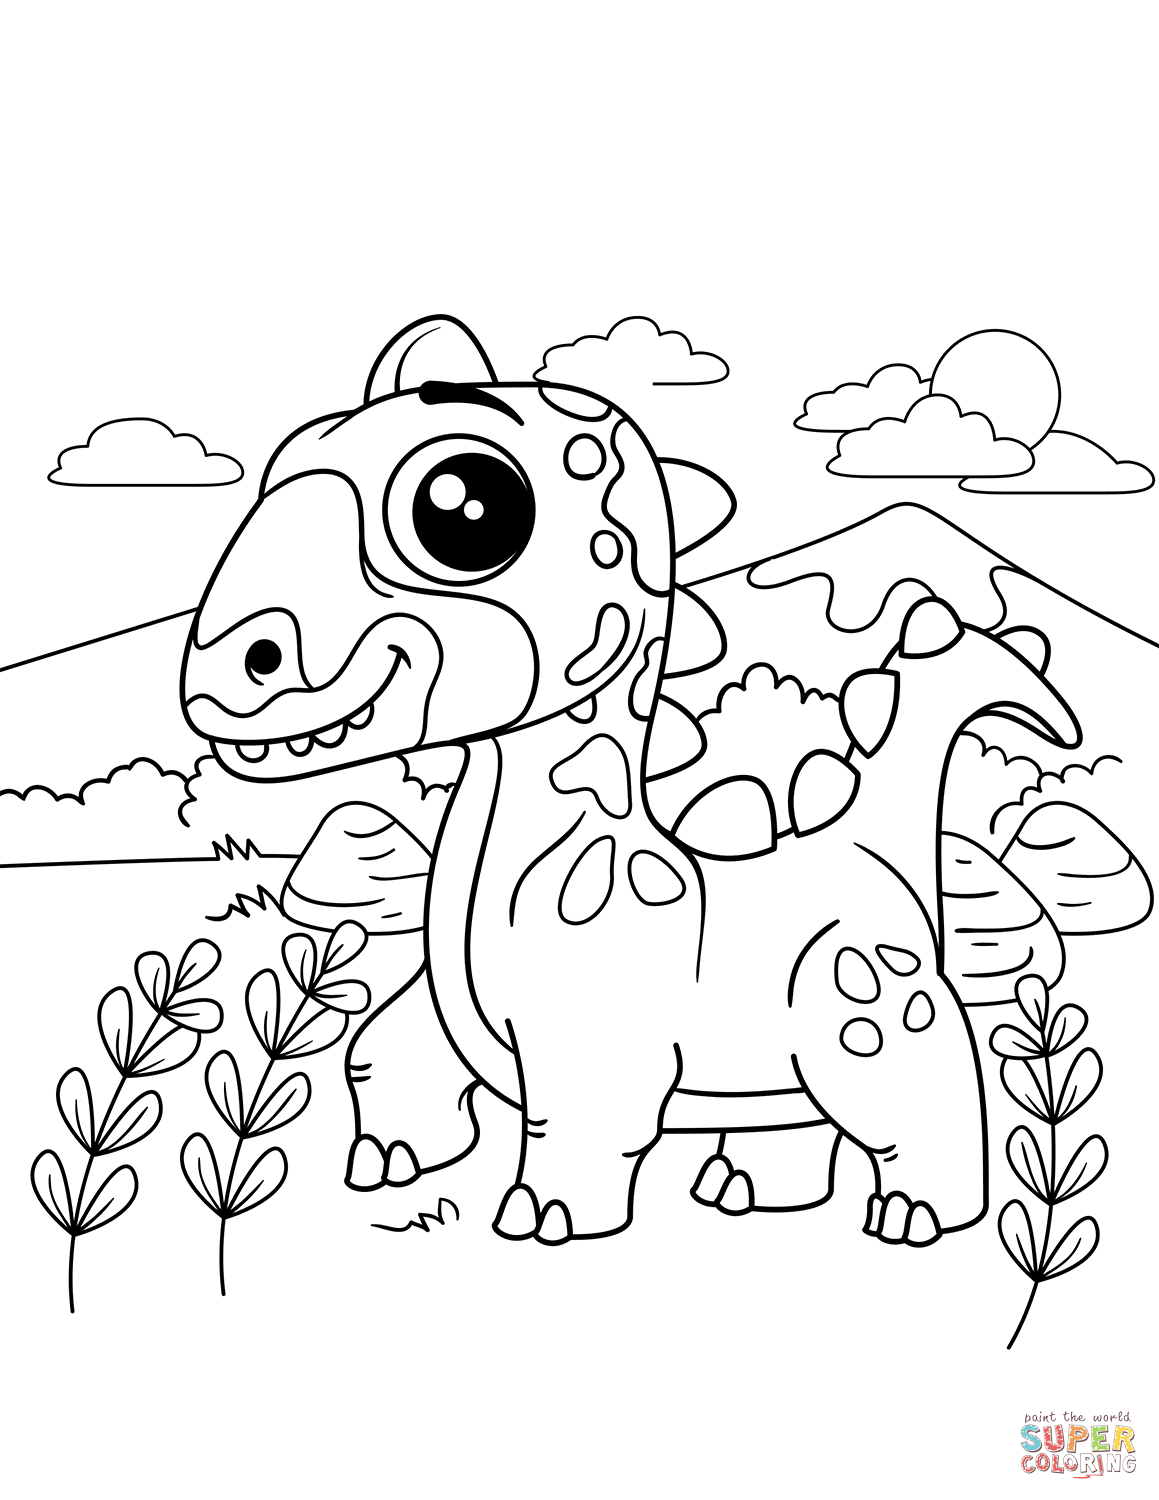 Cute dinosaur coloring page free printable coloring pages